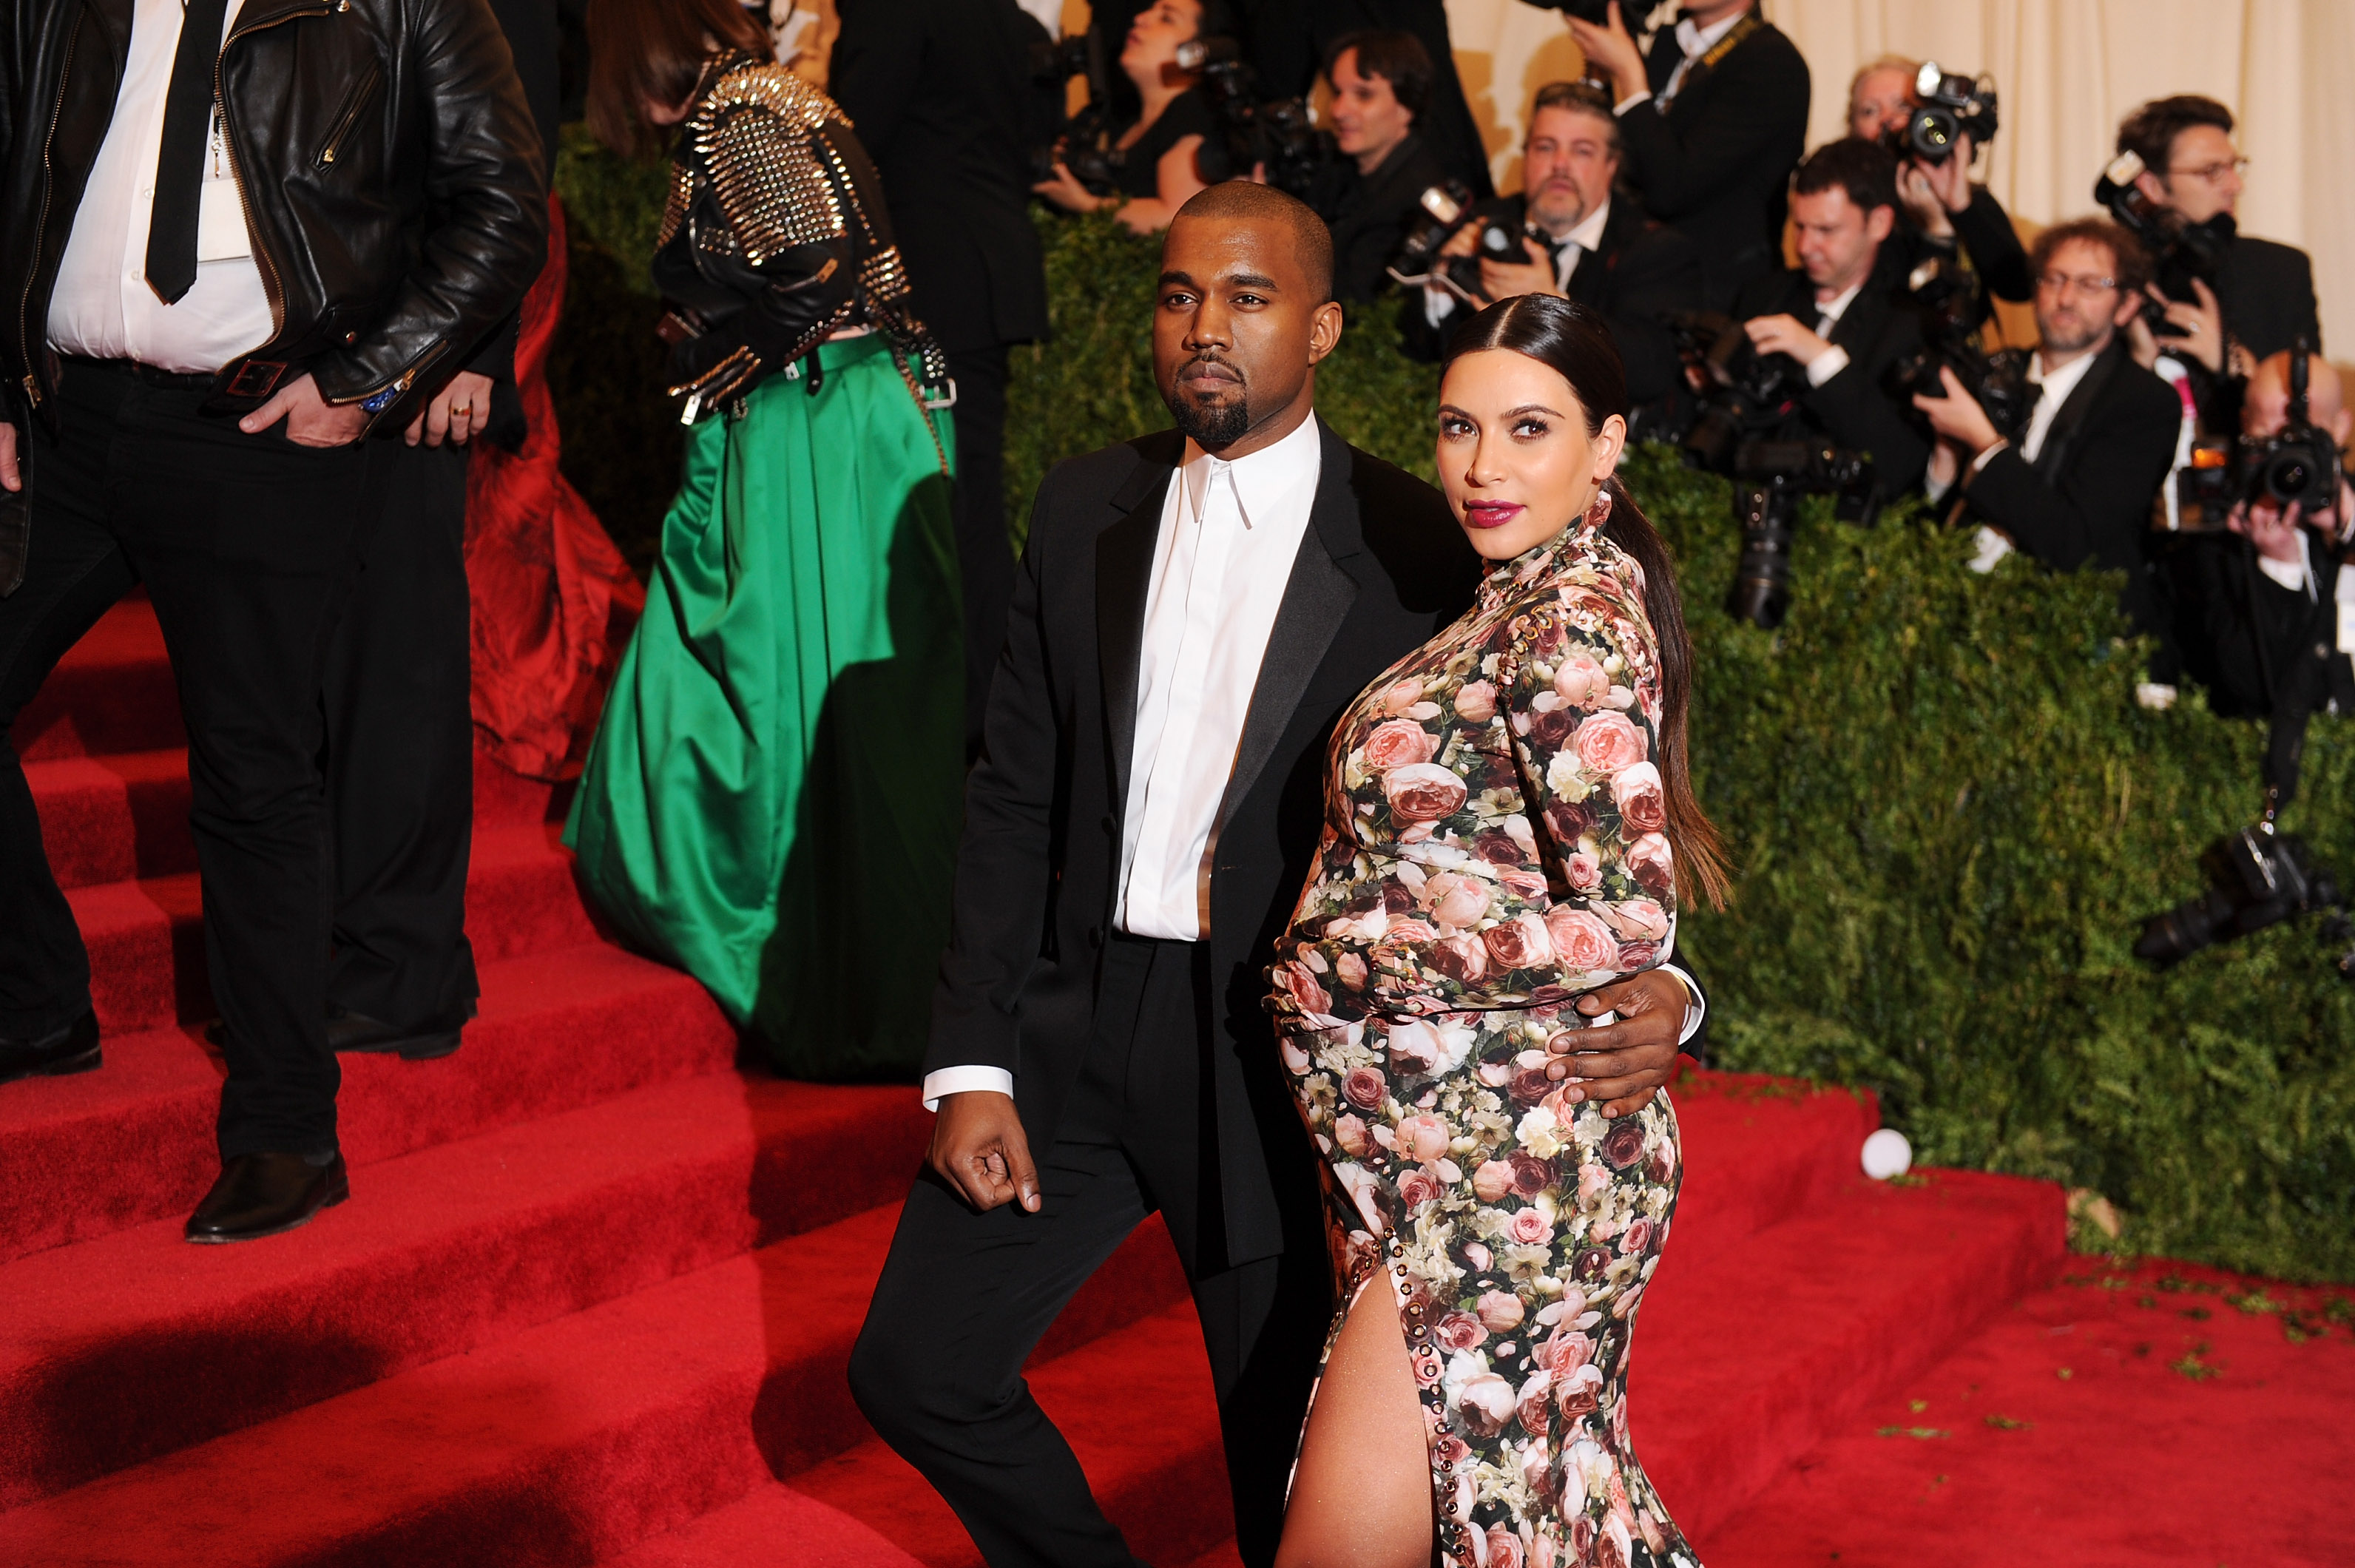 Kanye West and Kim Kardashian West attend the Met Gala.